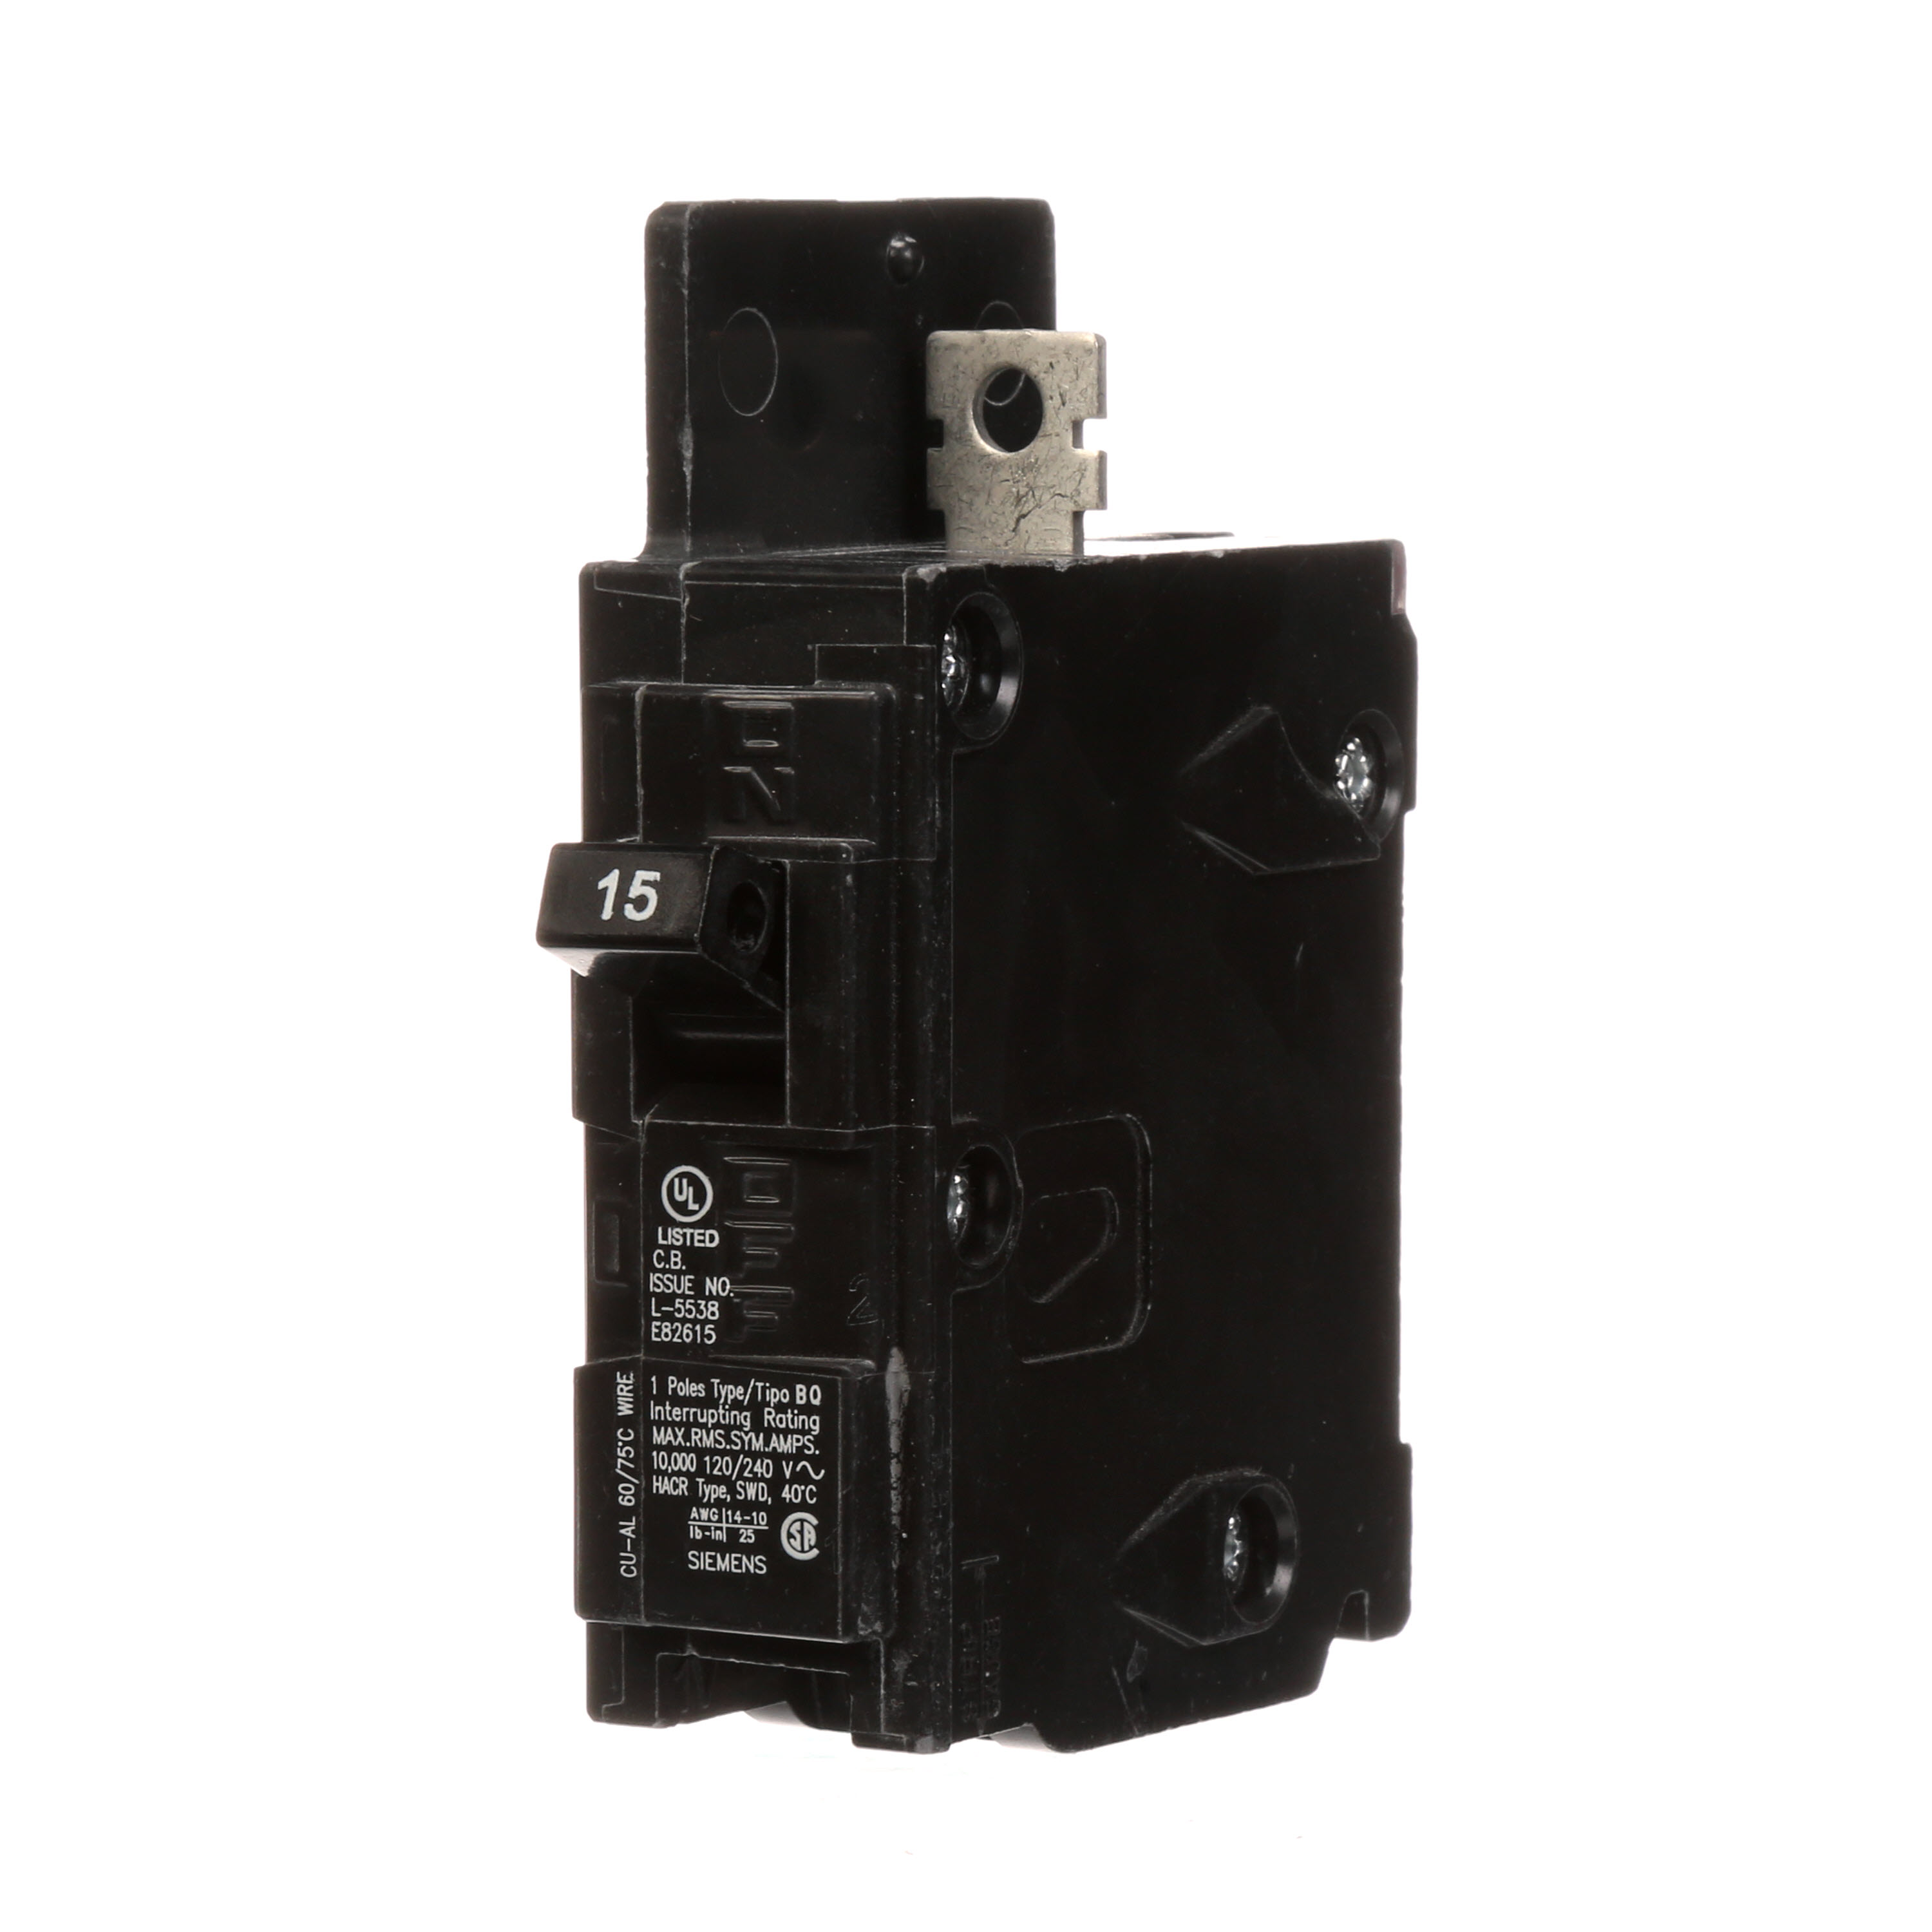 Siemens Low Voltage Molded Case Circuit Breakers General Purpose MCCBs are Circuit Protection Molded Case Circuit Breakers. 1-Pole circuit breaker type BQ. Rated 120V (015A) (AIR 10 kA). Special features Load side lugs are included.